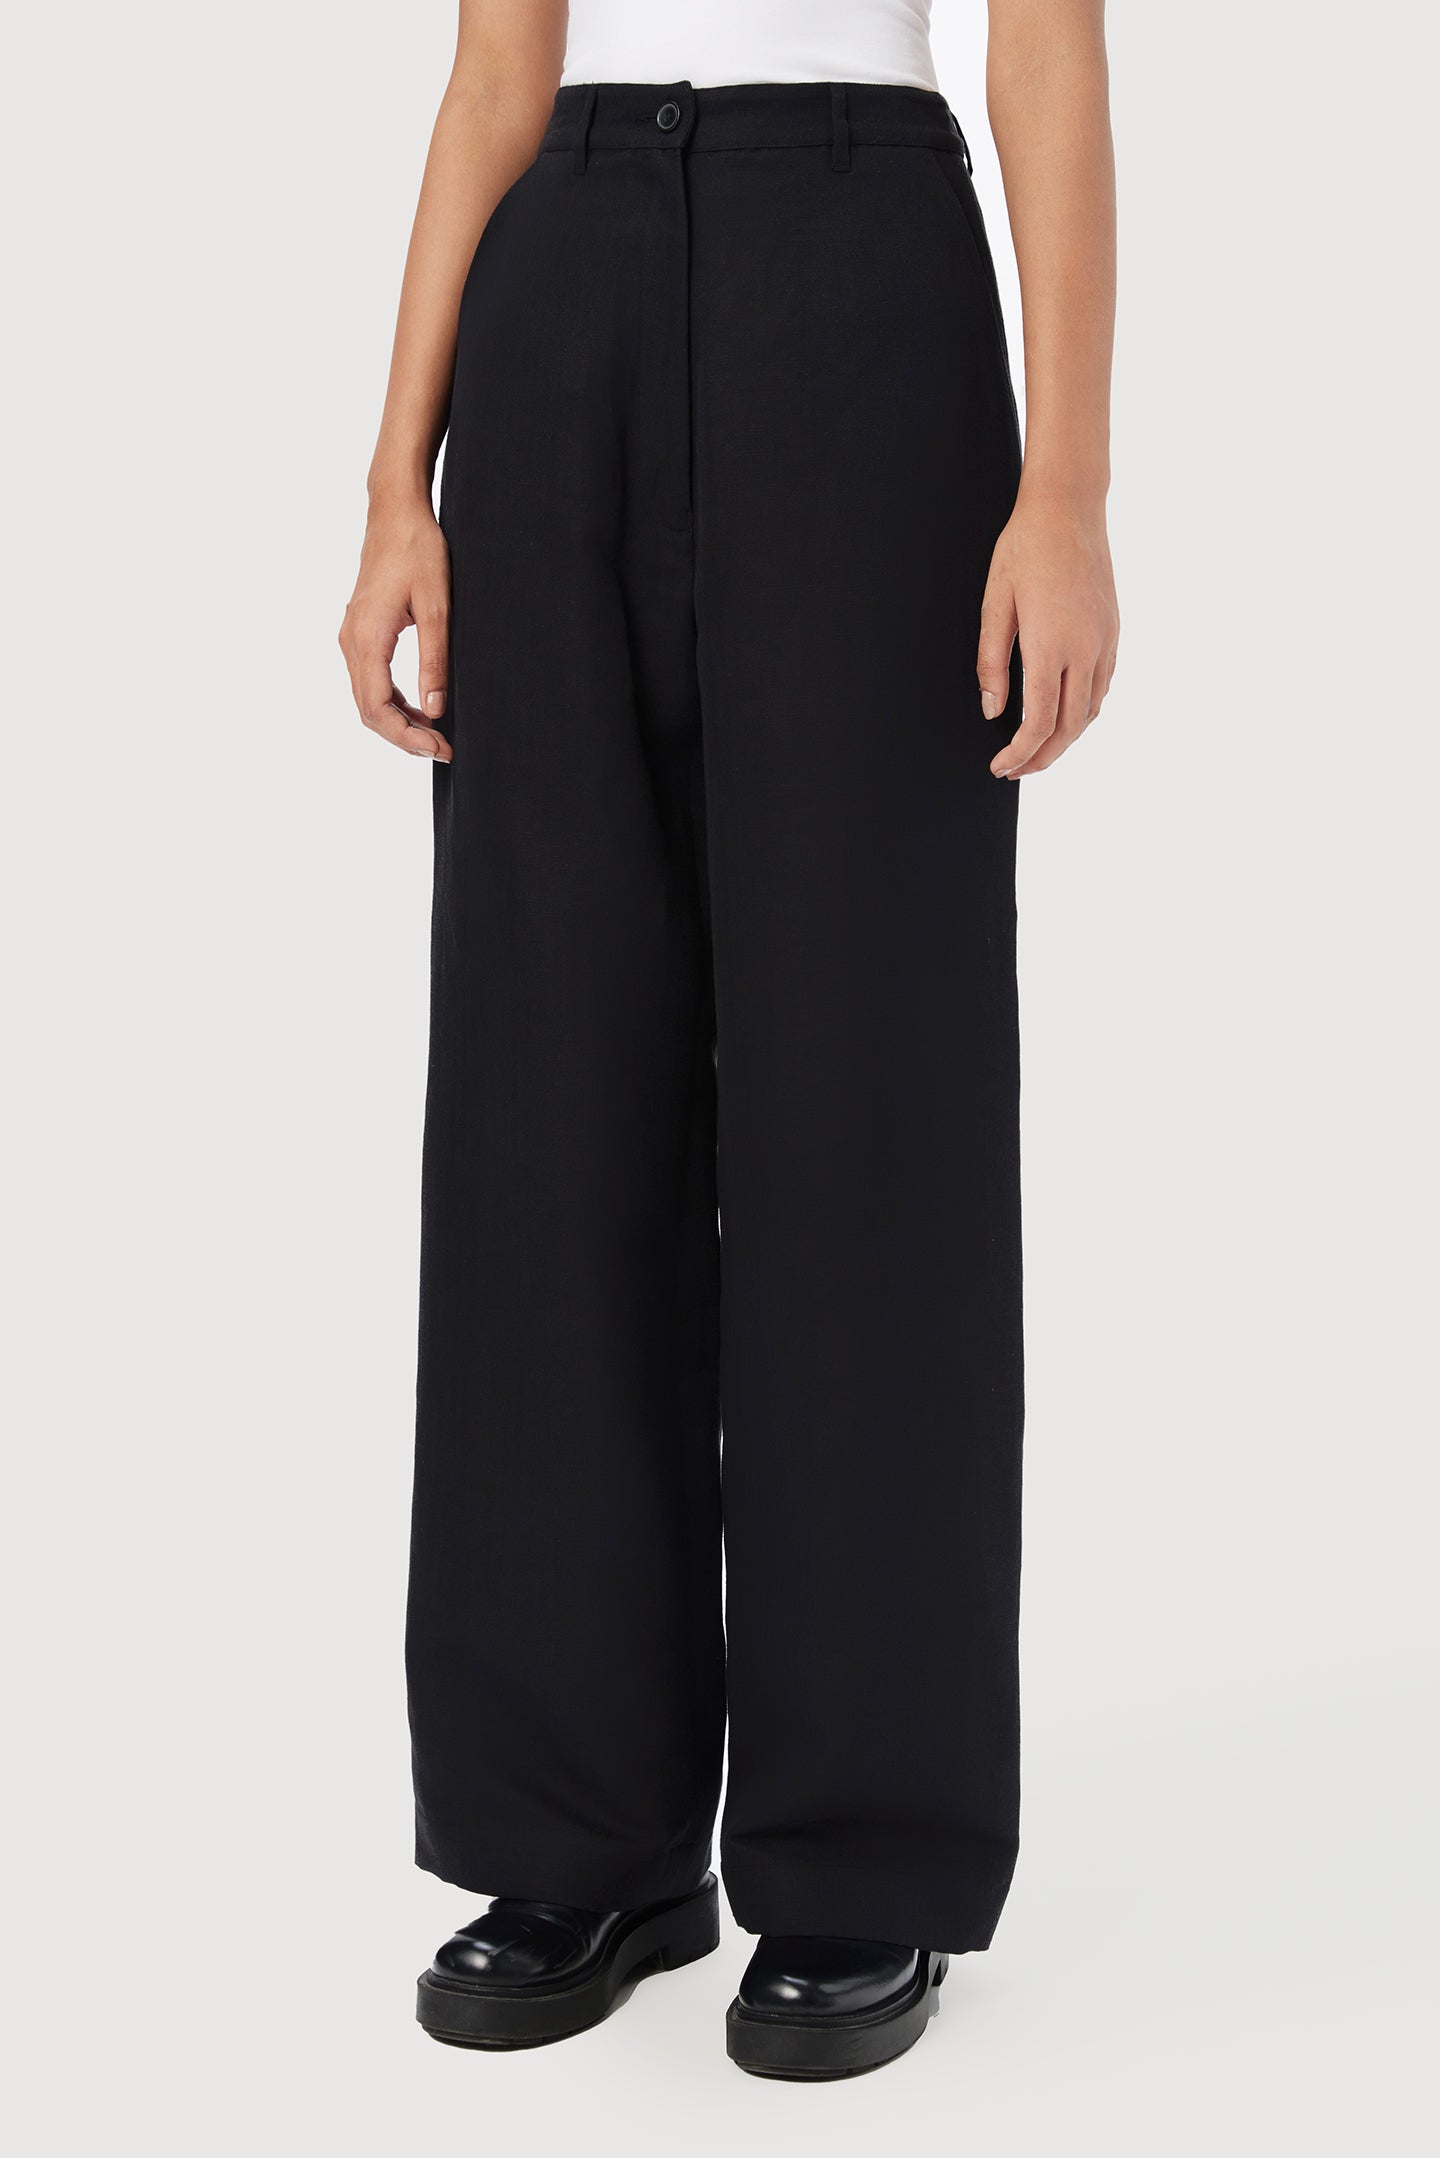 Easy Fit Flared Trousers with Stylish Bone Pocket Detail on the Back